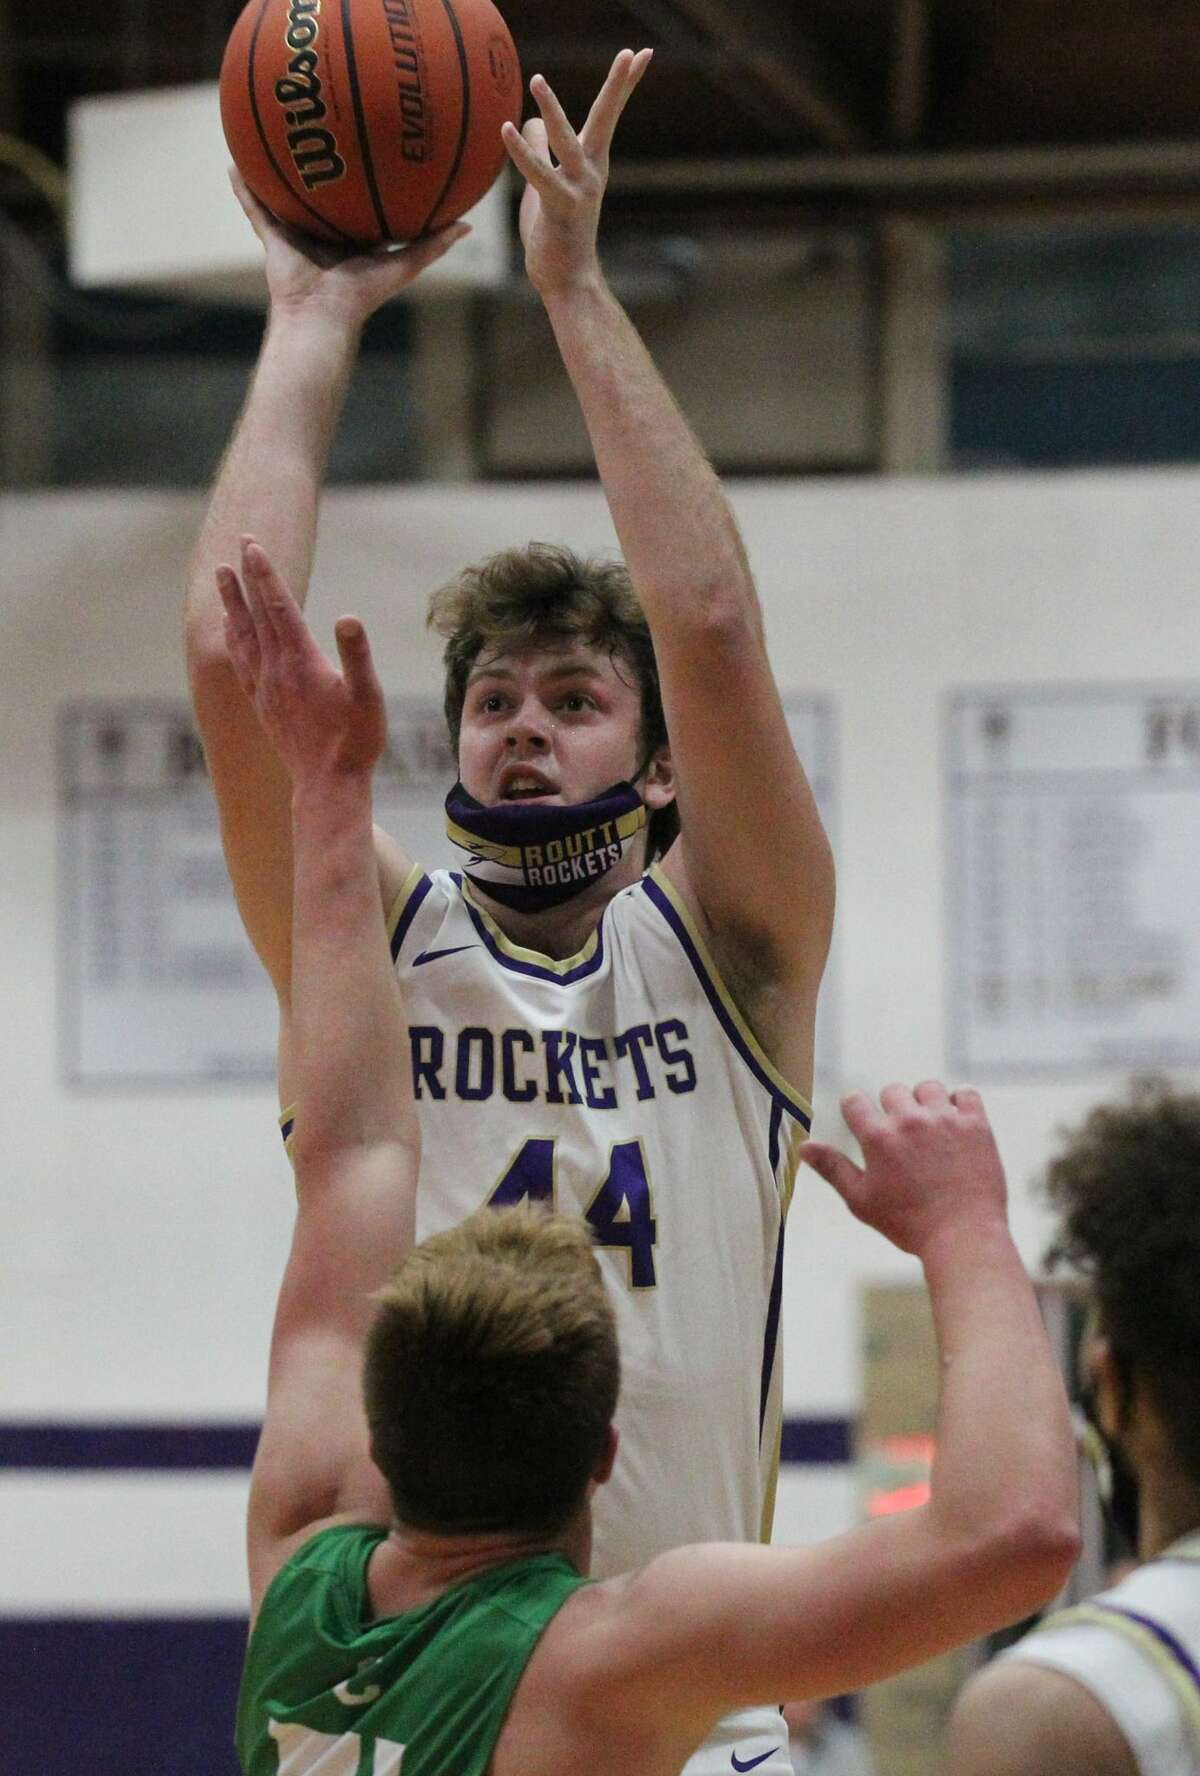 Routt's Gus Abell puts up a shot during a boys' basketball game against Carrollton at the Routt Dome in Jacksonville Thursday night.